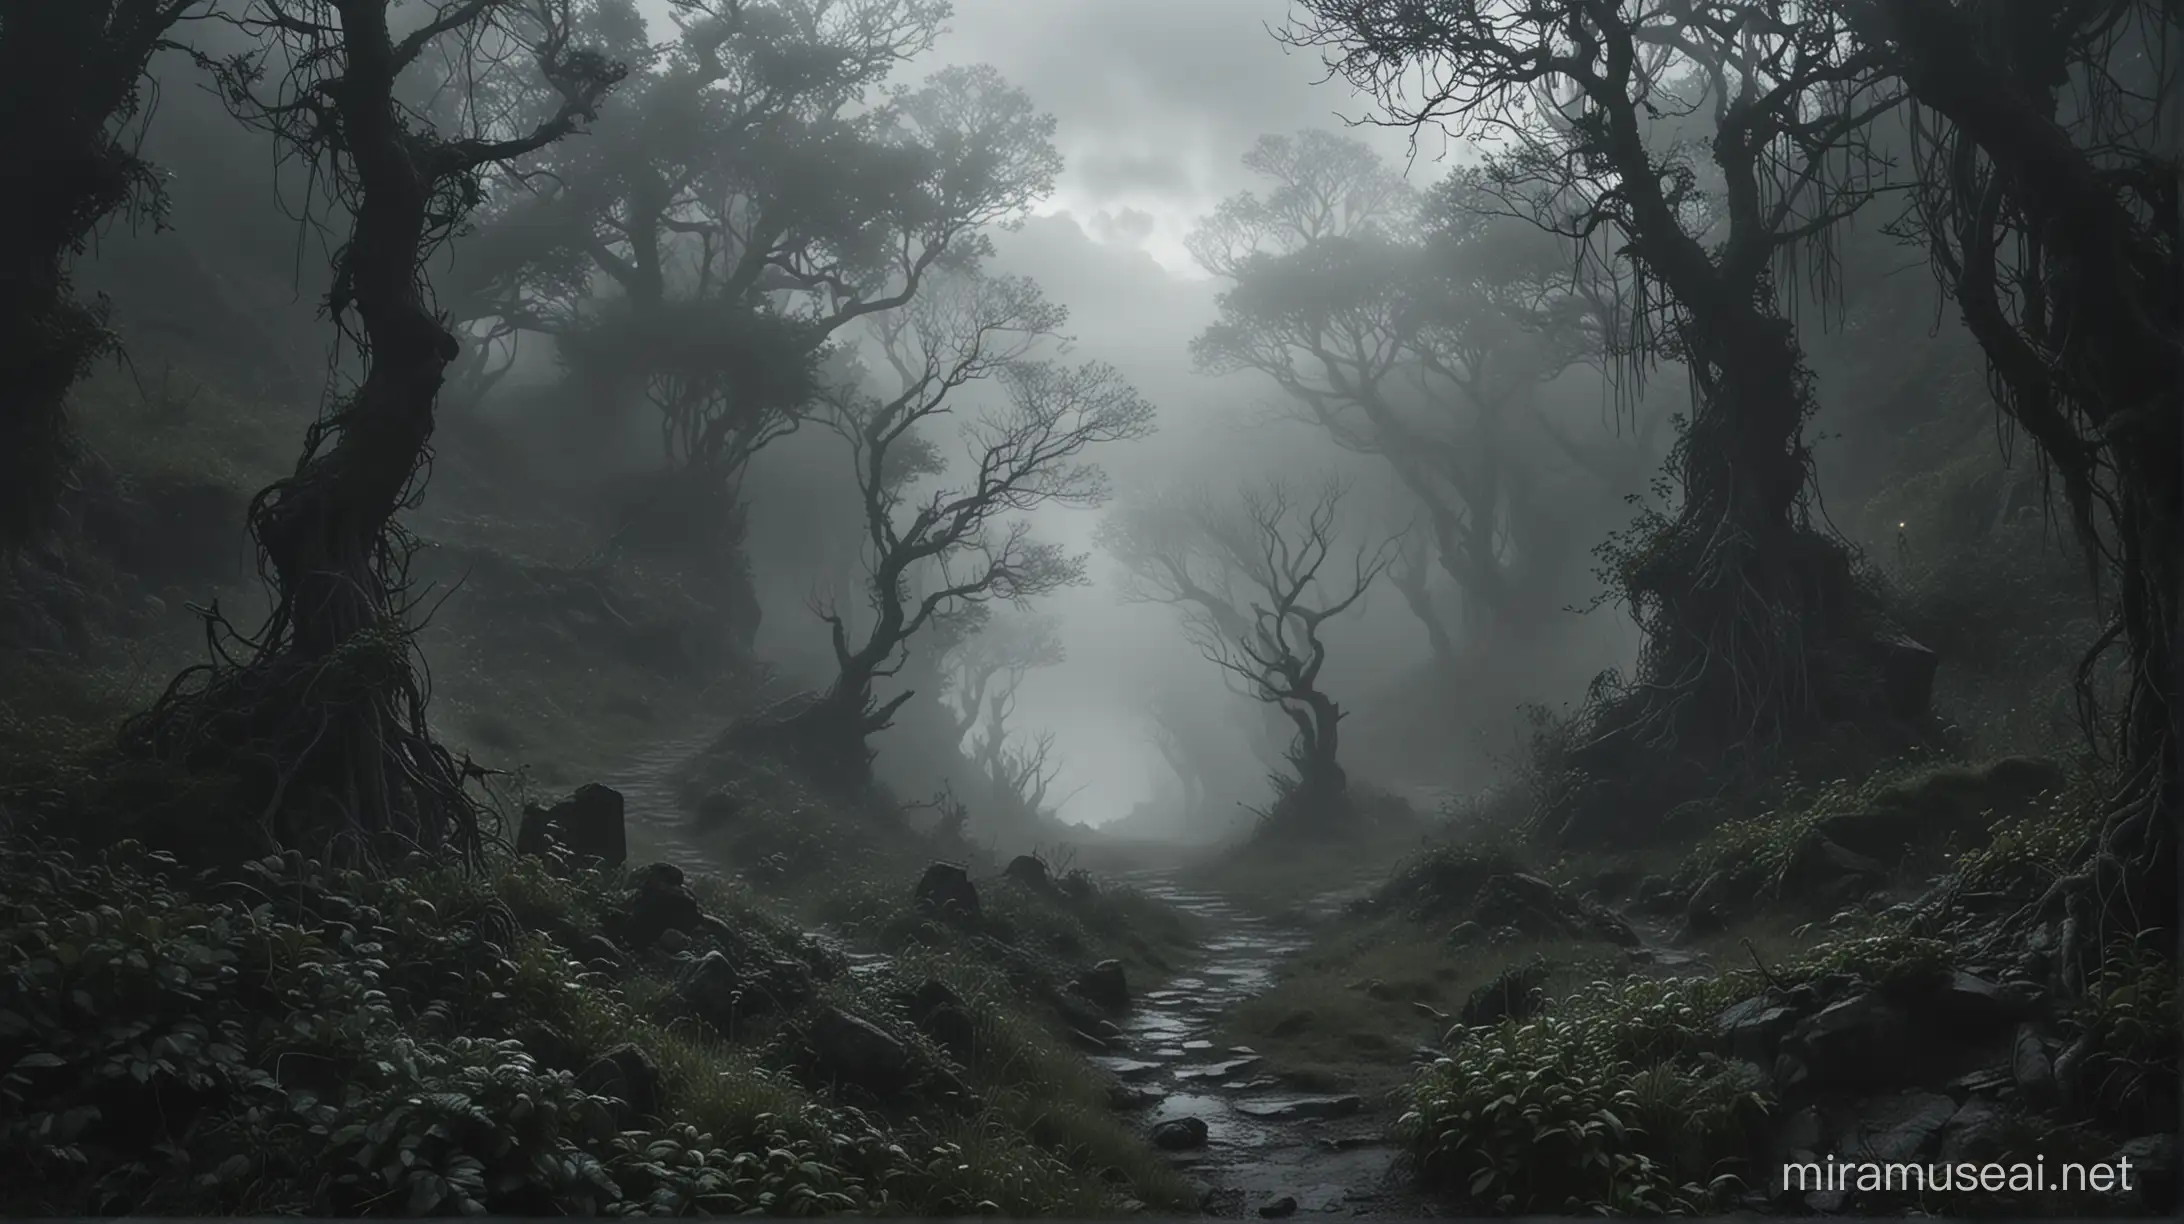 Mysterious Misty Landscape with Jagged Cliffs and Ethereal Lights